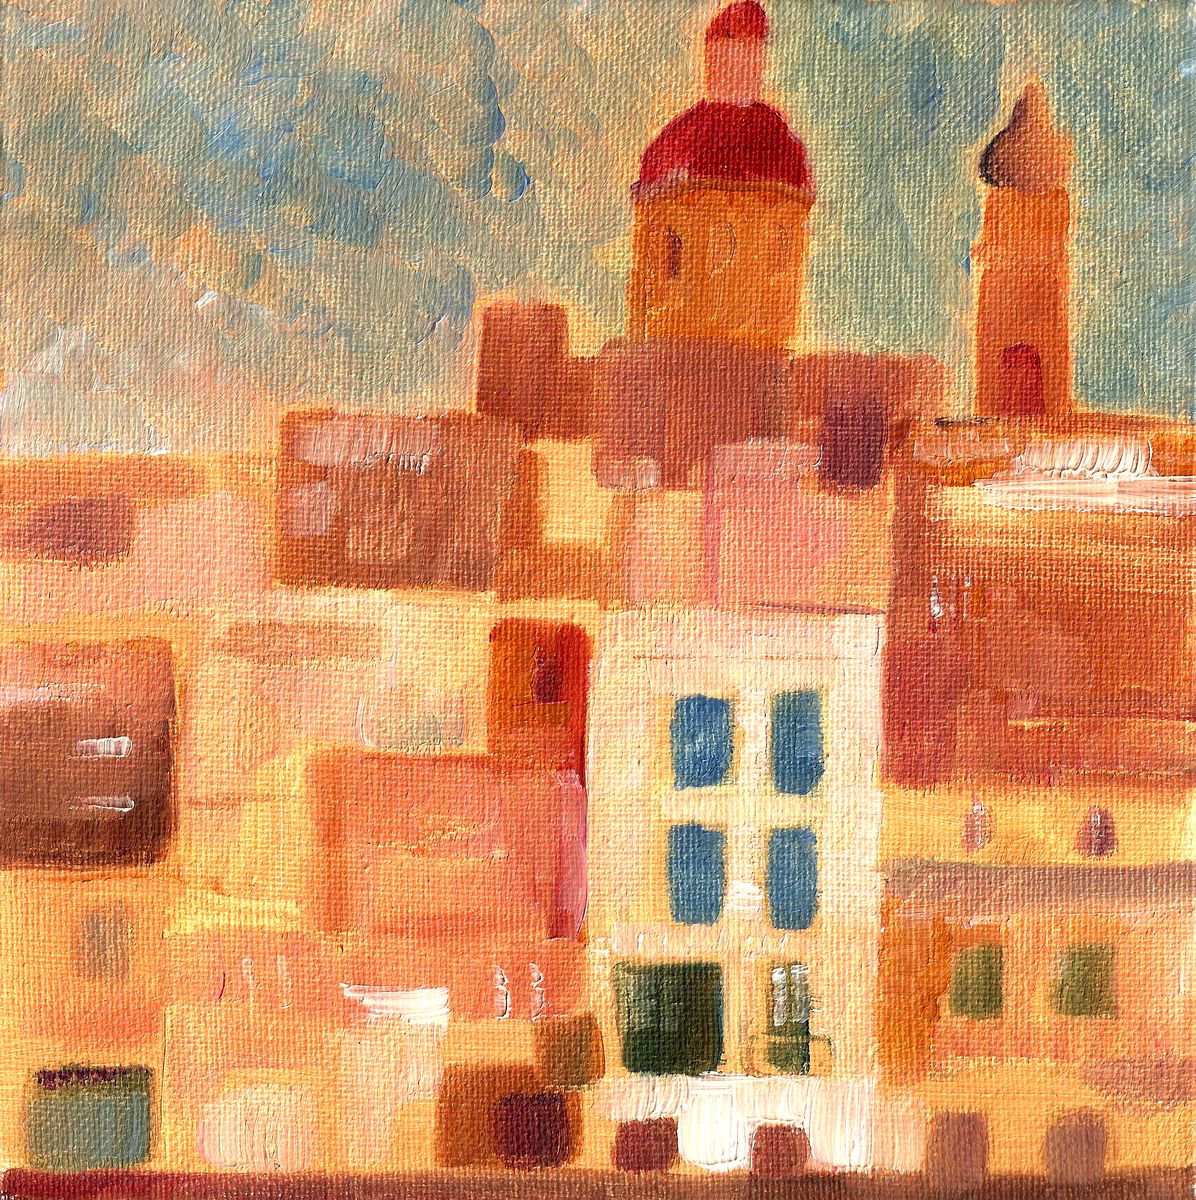 Malta Impressions by Mary Stubberfield